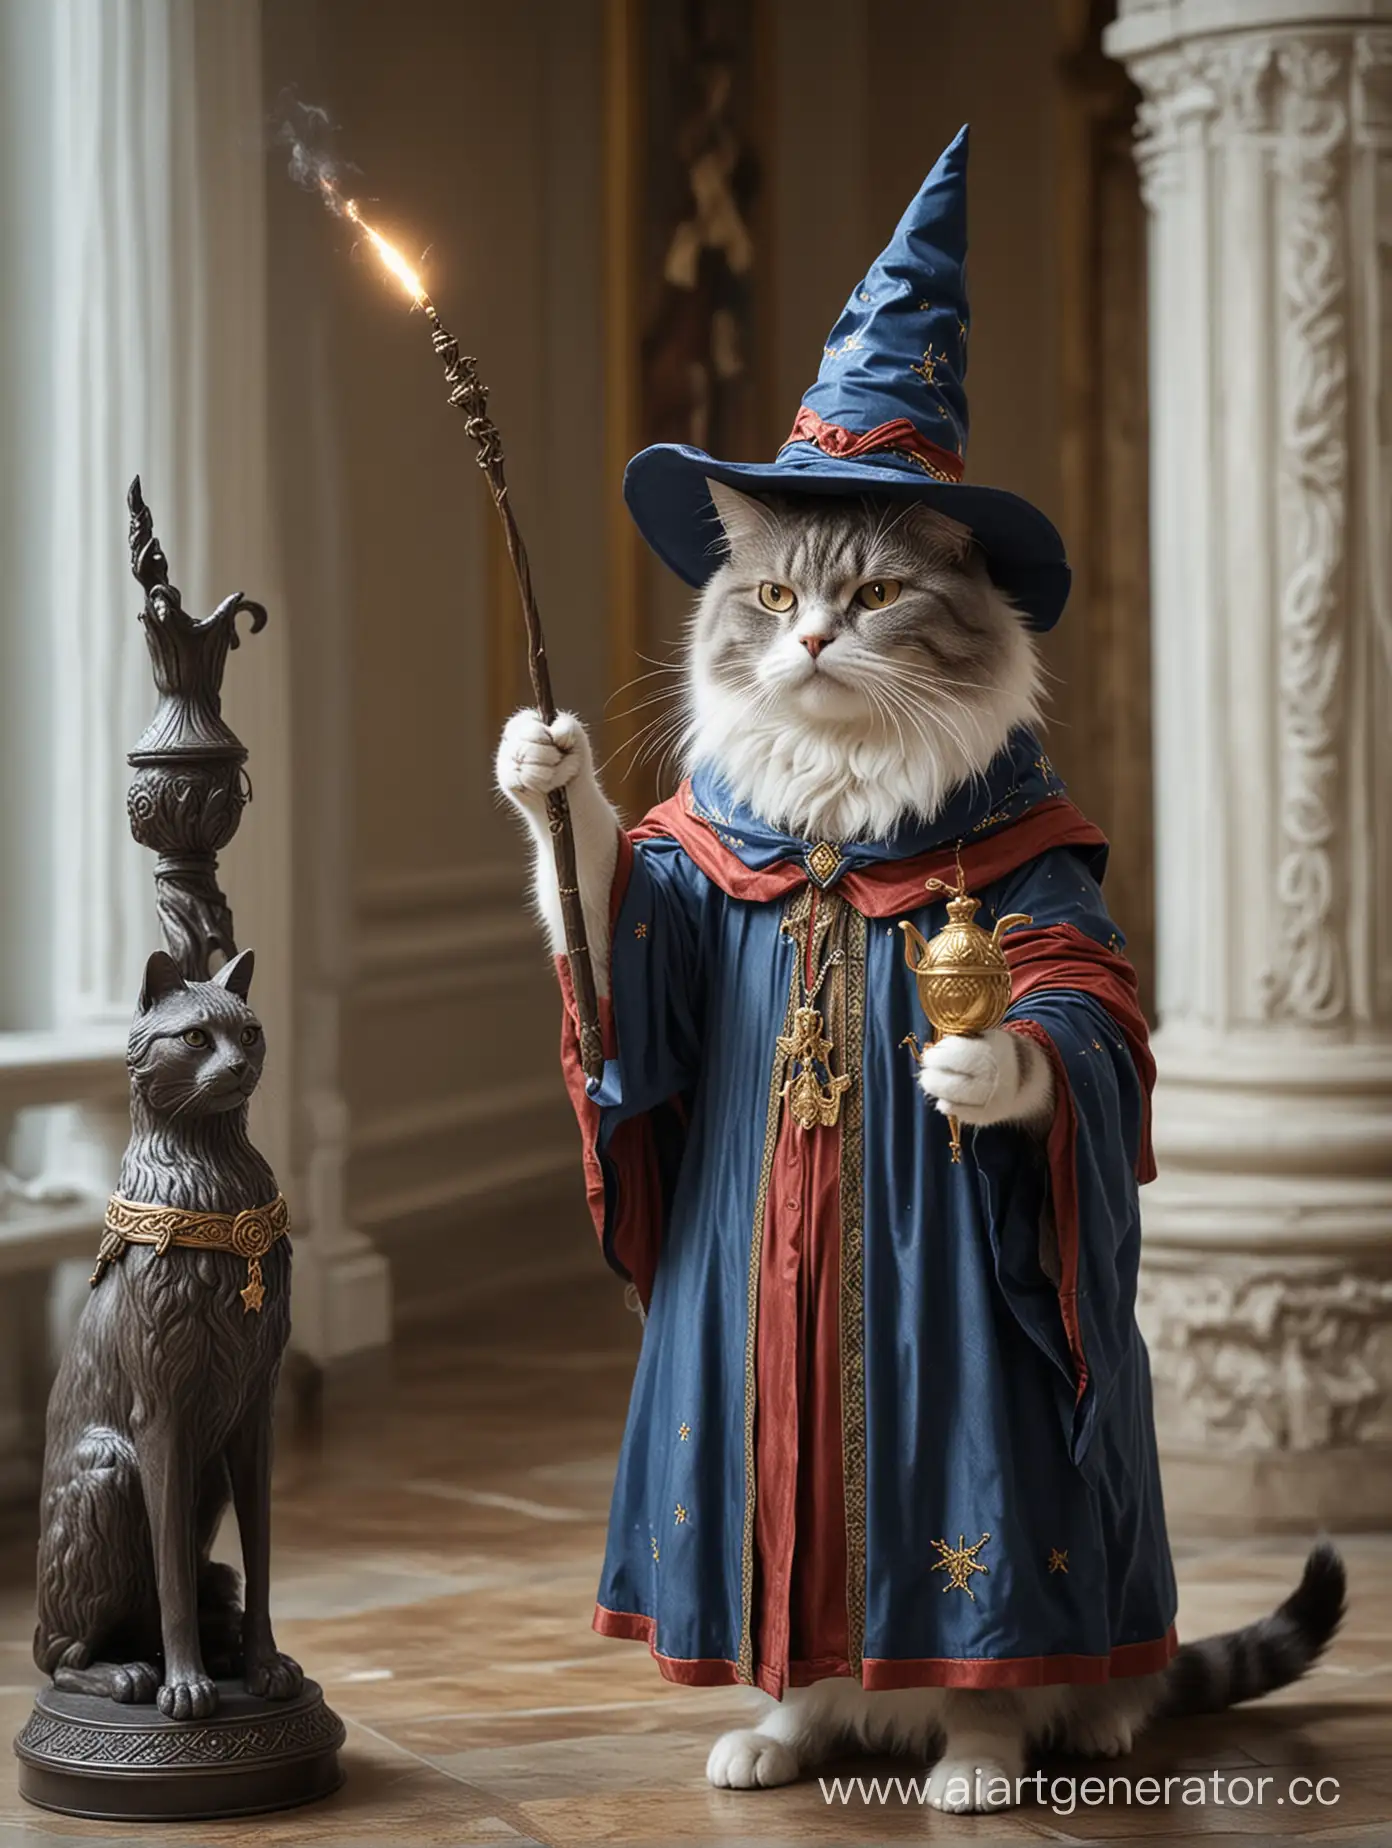 Wizard-Cat-Bringing-Statues-to-Life-in-the-Hermitage-with-Magic-Wand